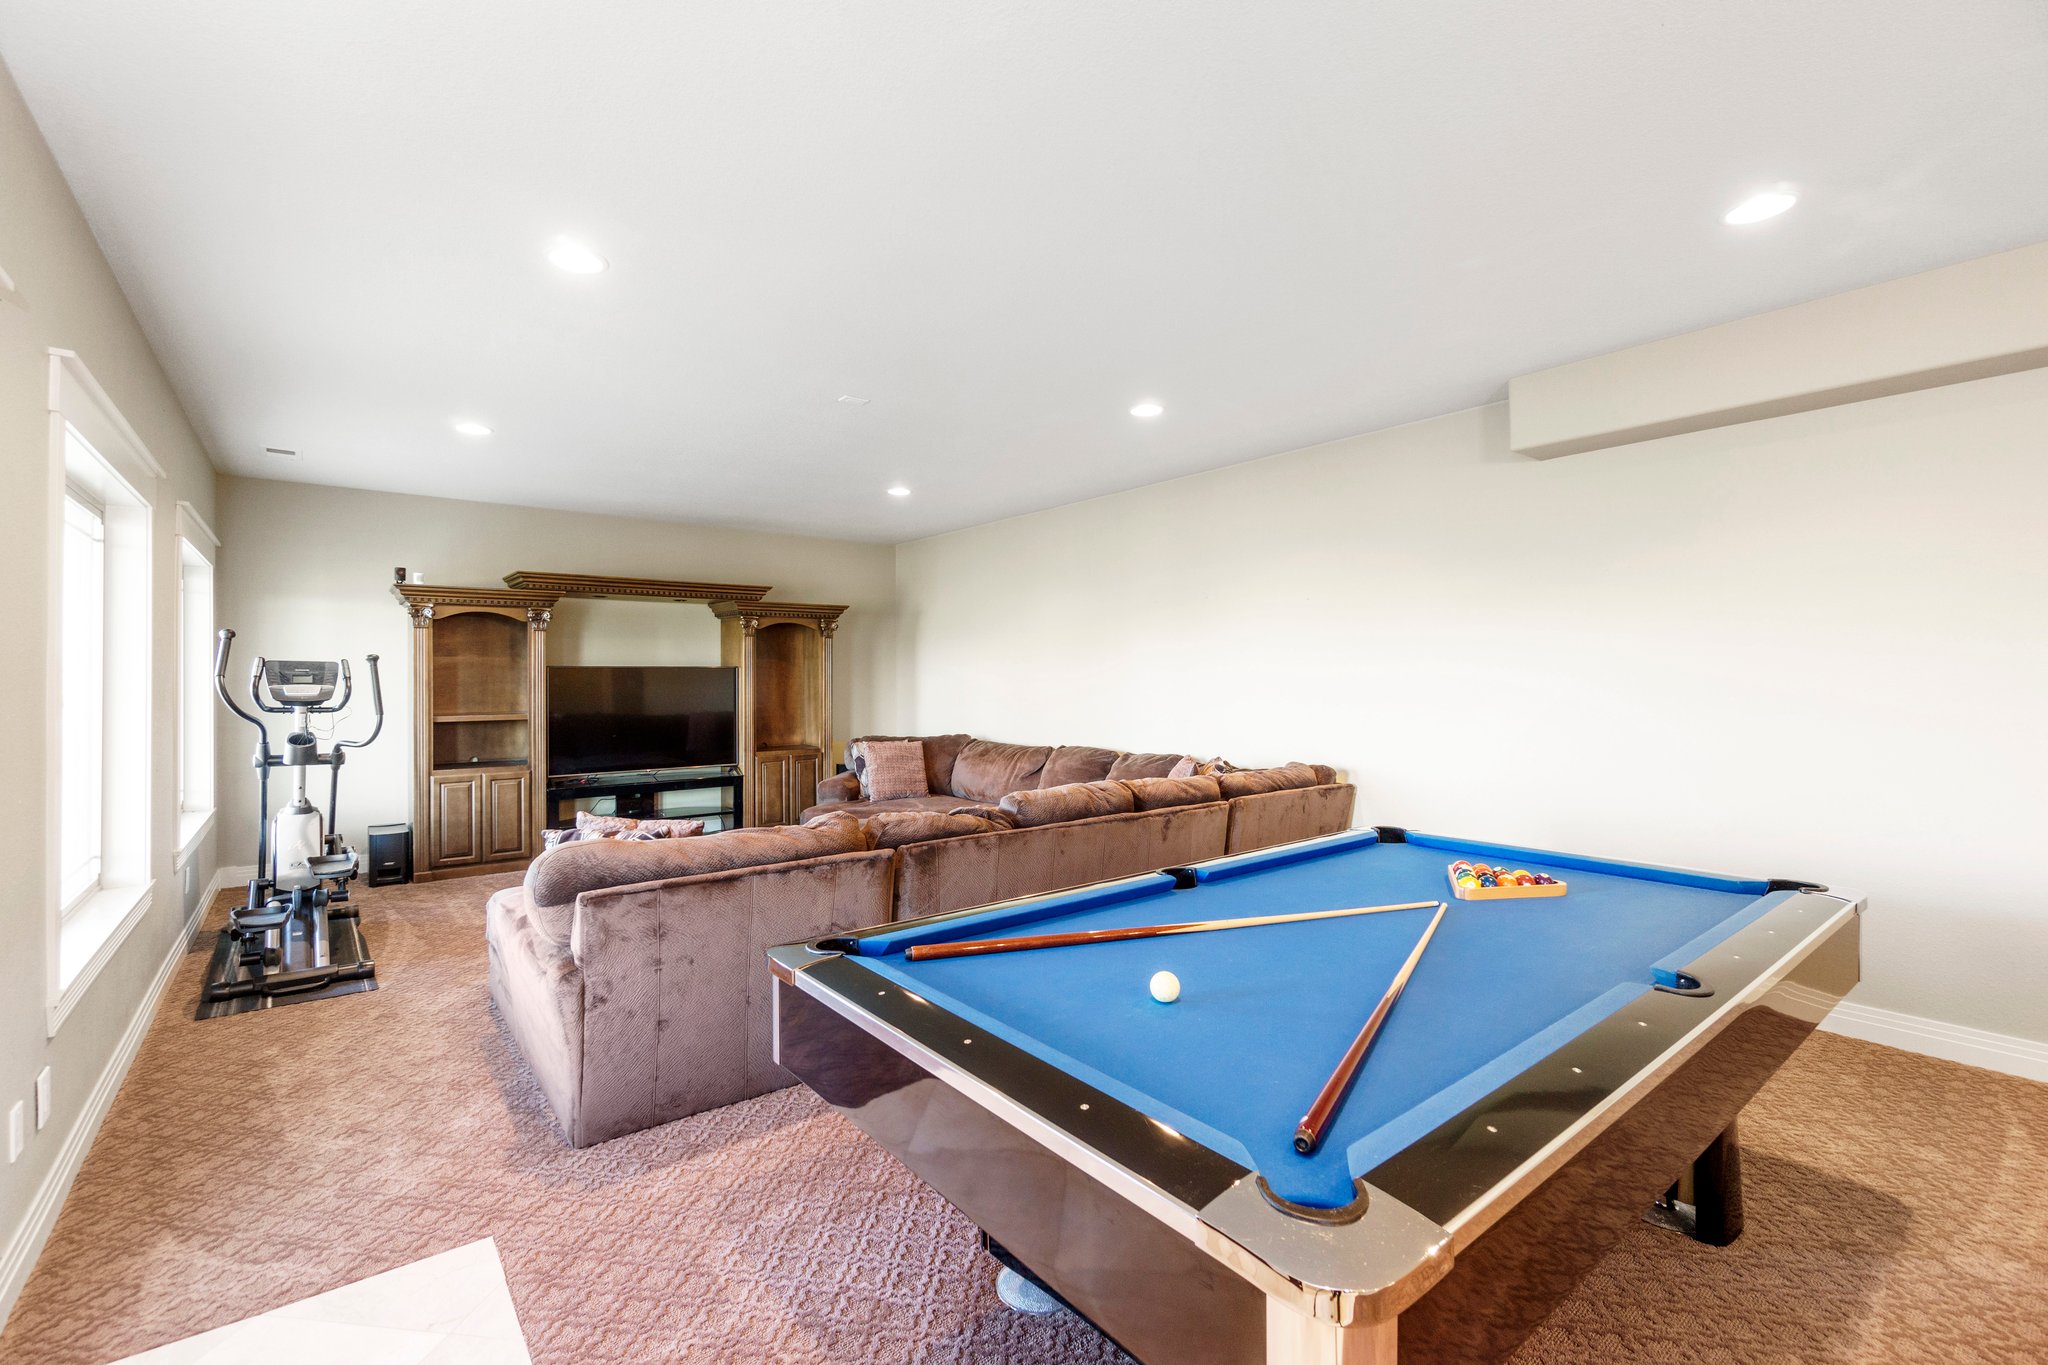 2,194 sq ft finished walk-out basement (Pool table not included)